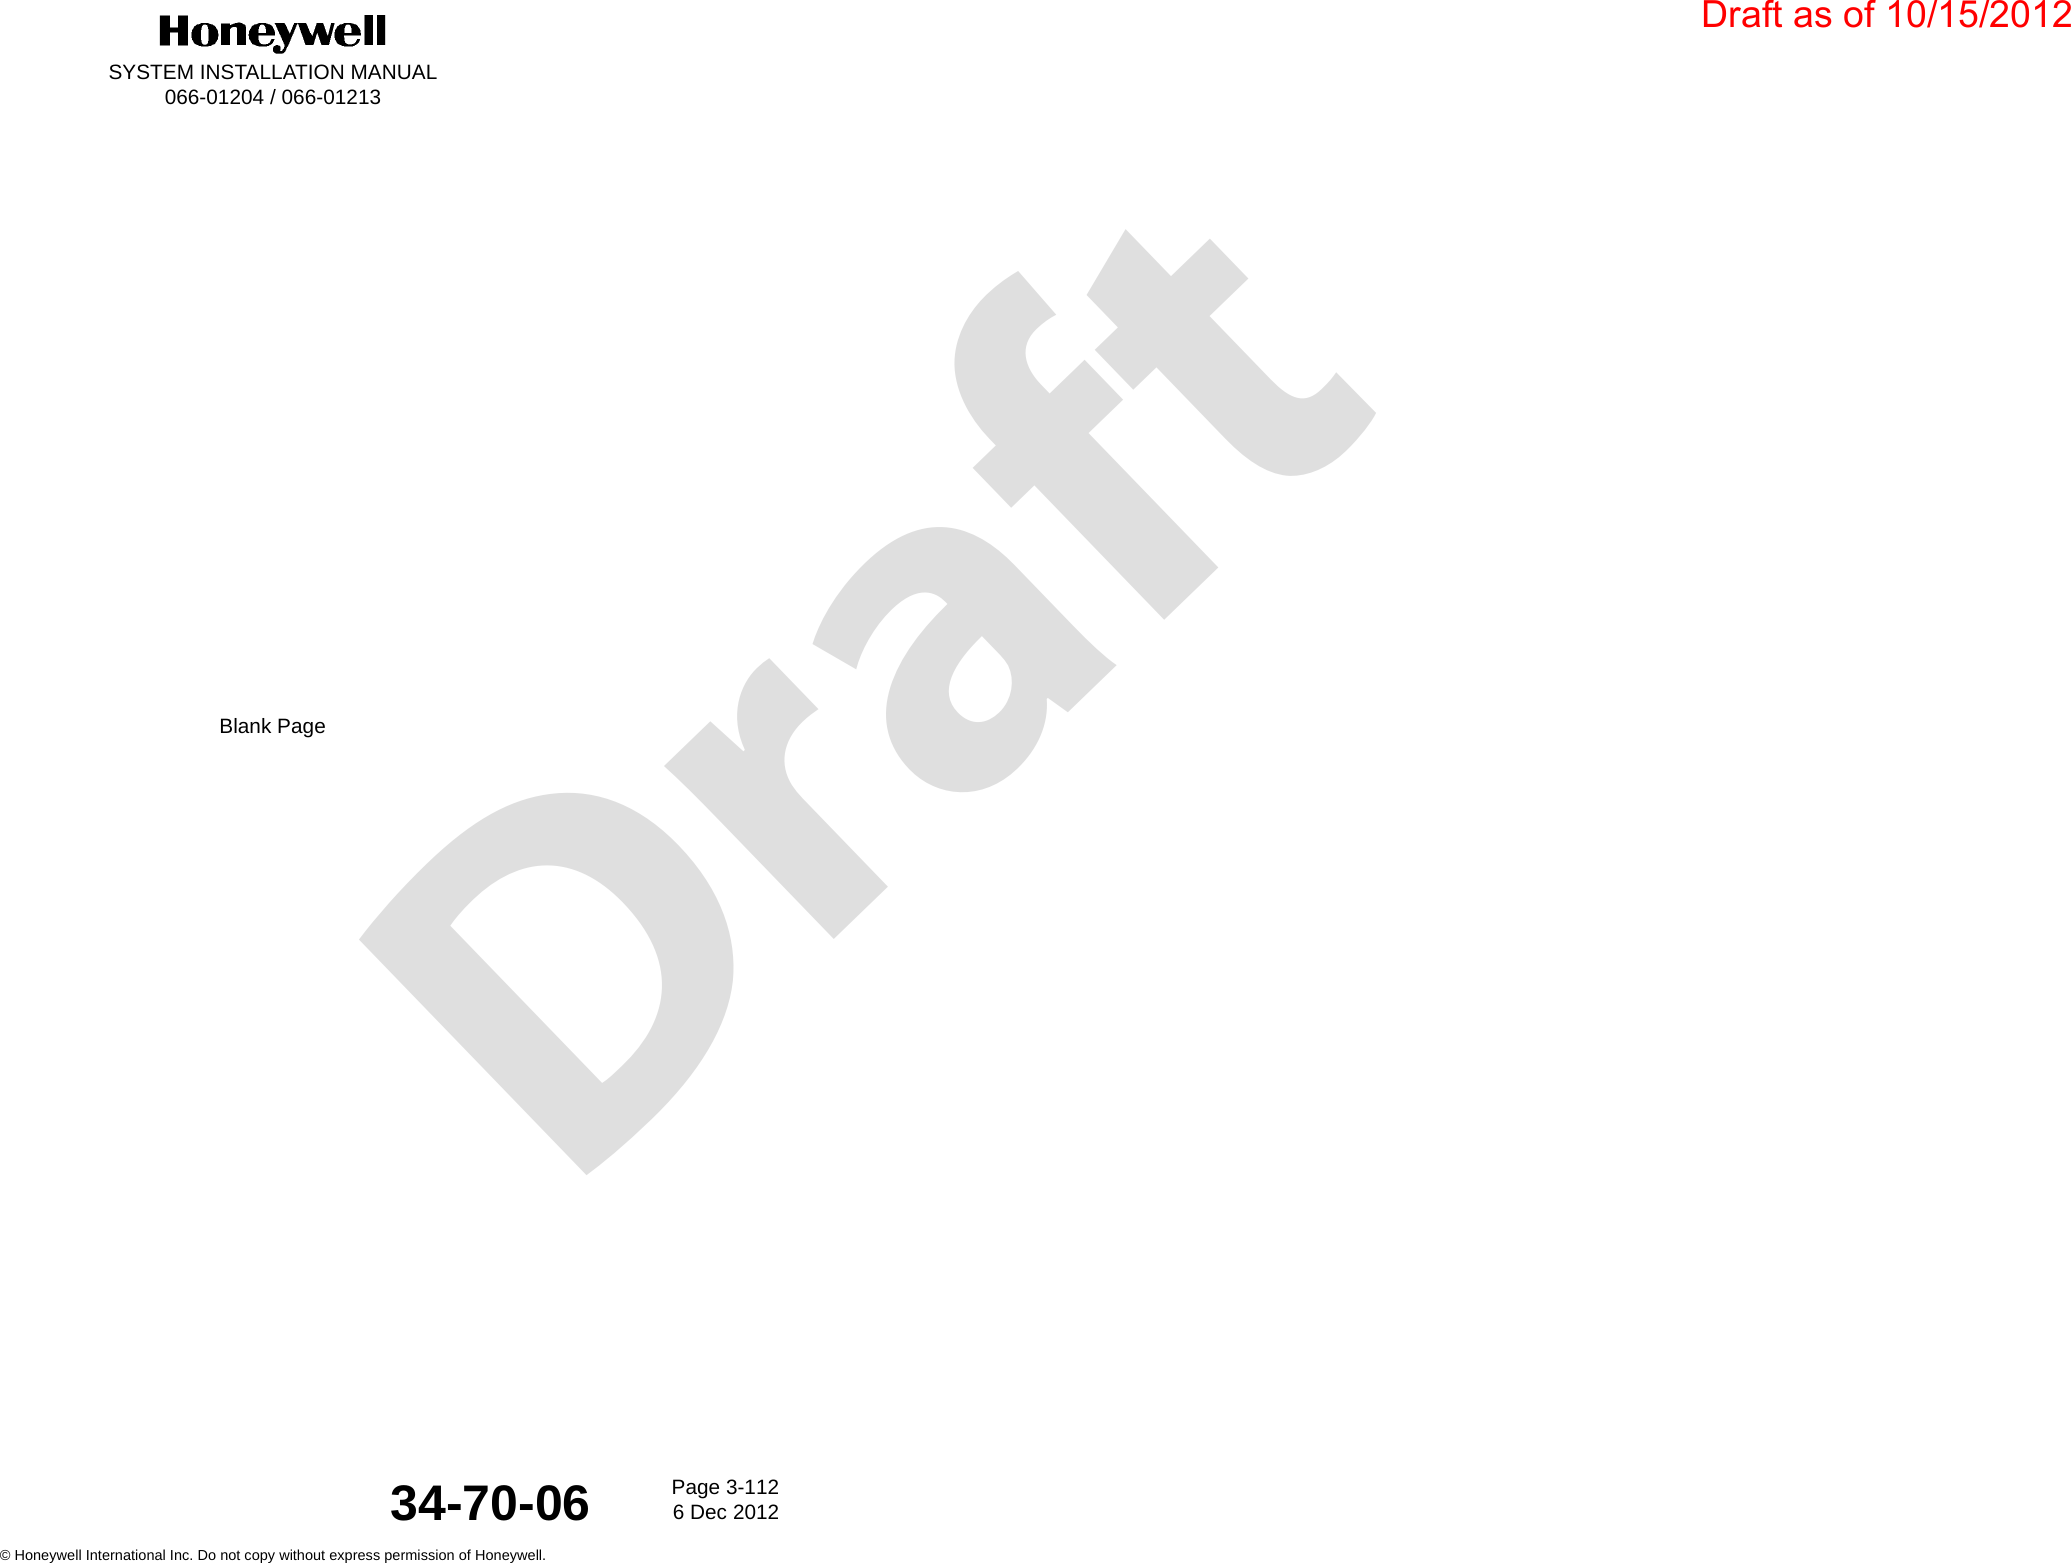 DraftSYSTEM INSTALLATION MANUAL066-01204 / 066-01213Page 3-1126 Dec 2012© Honeywell International Inc. Do not copy without express permission of Honeywell.34-70-06Blank PageDraft as of 10/15/2012